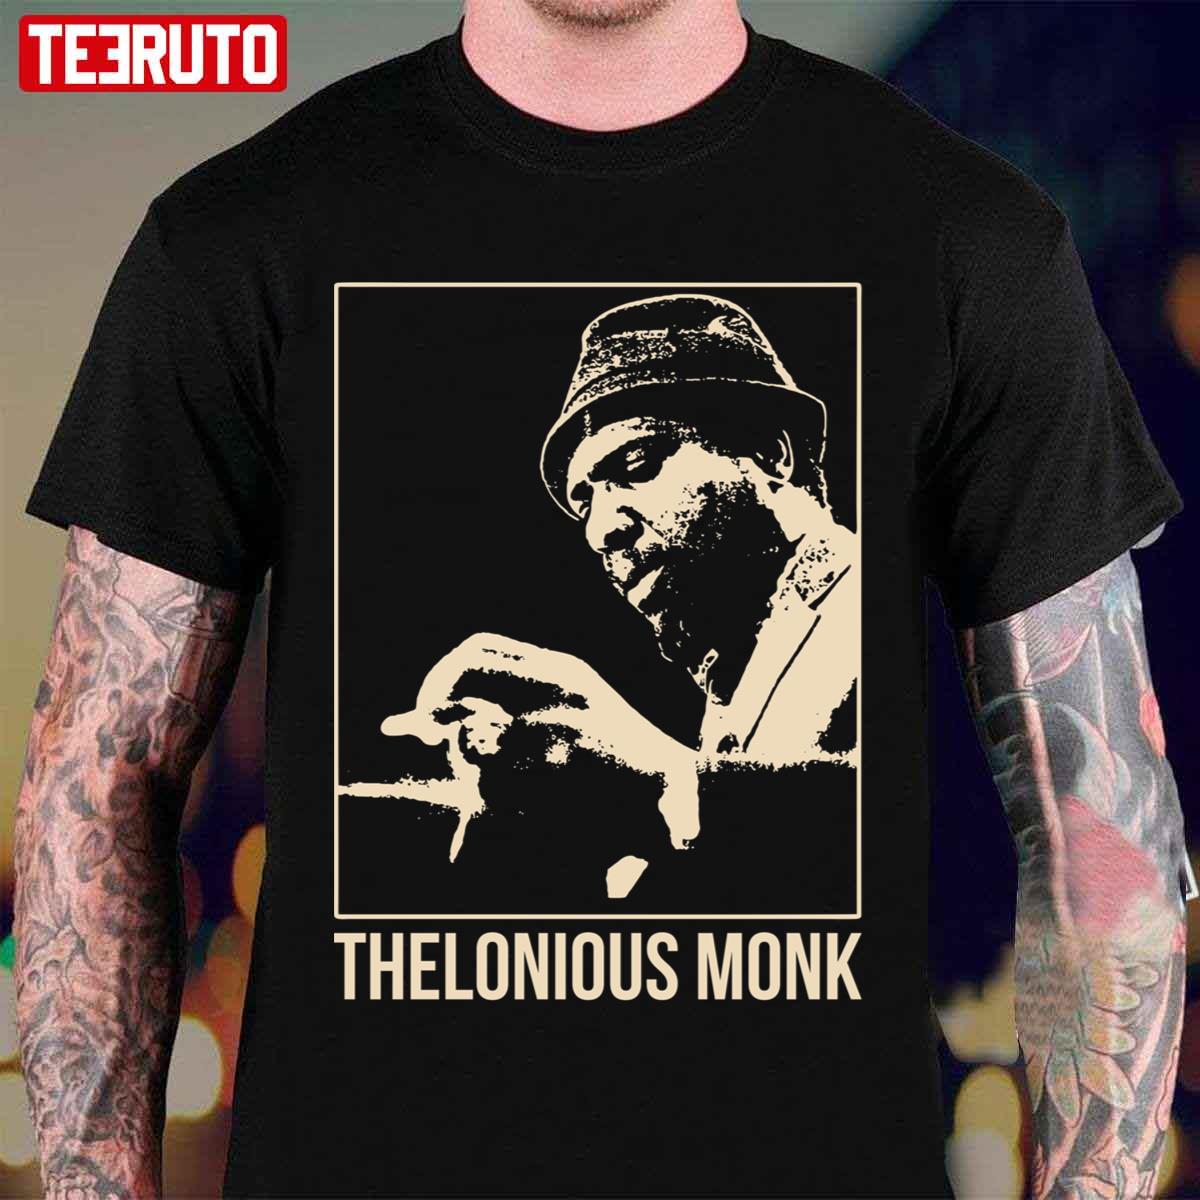 Best Equipment For The Old Day Thelonious Monk Unisex T-Shirt